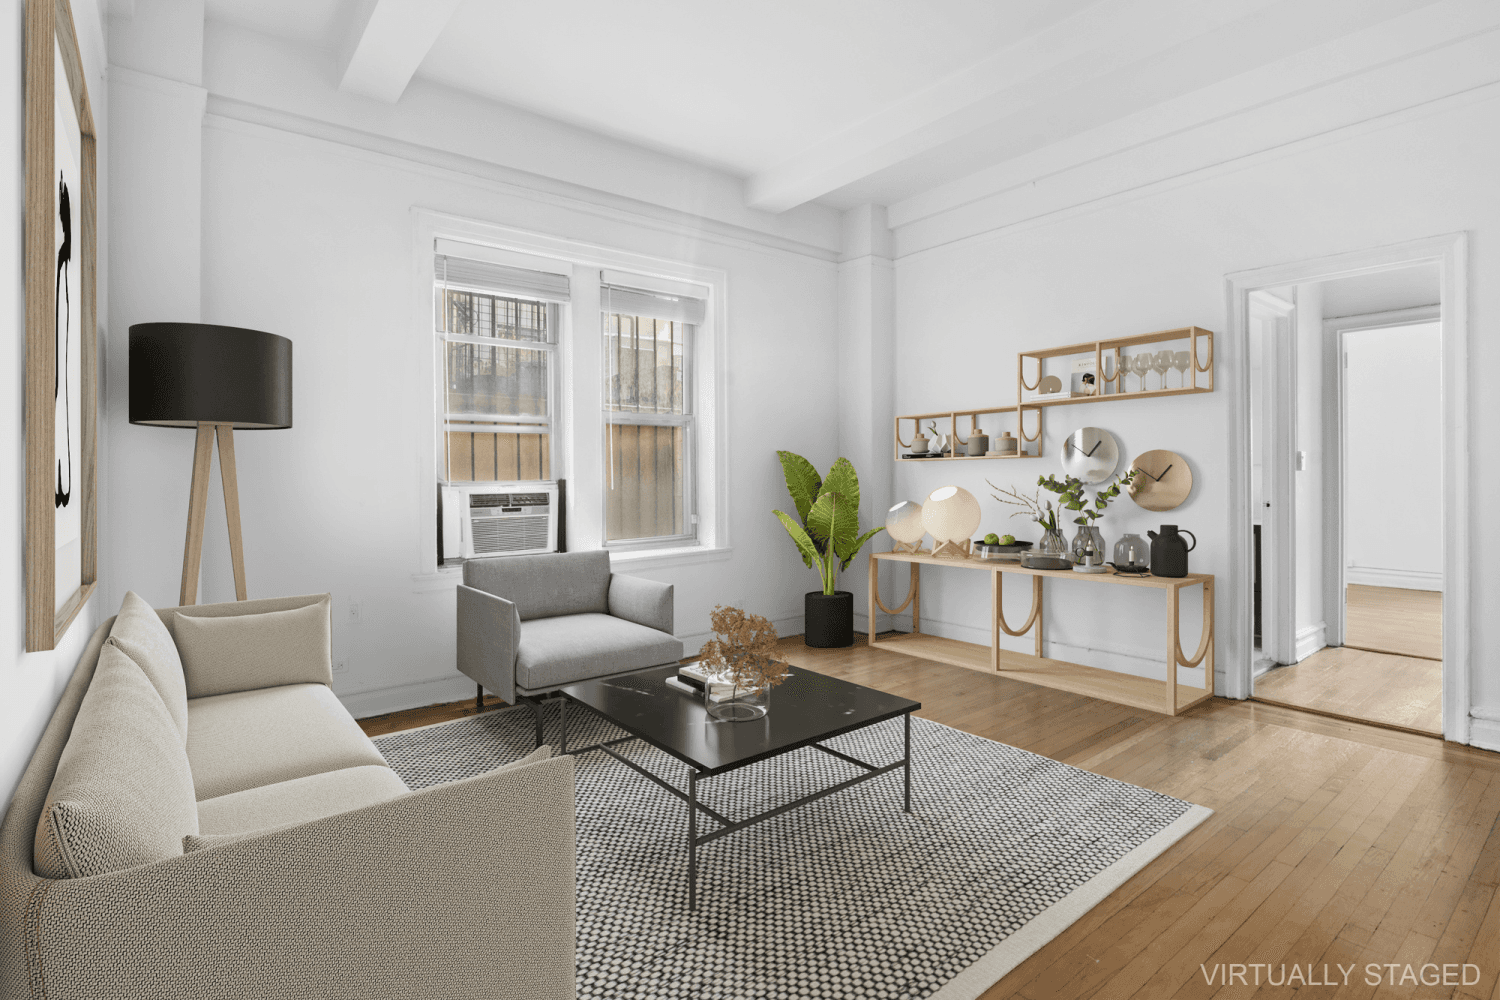 Welcome to apartment 1C, an appealing corner one bedroom apartment nestled in the historic Rose Hill neighborhood of New York City, perfectly located between the Gramercy, NoMad, and Kips Bay ...